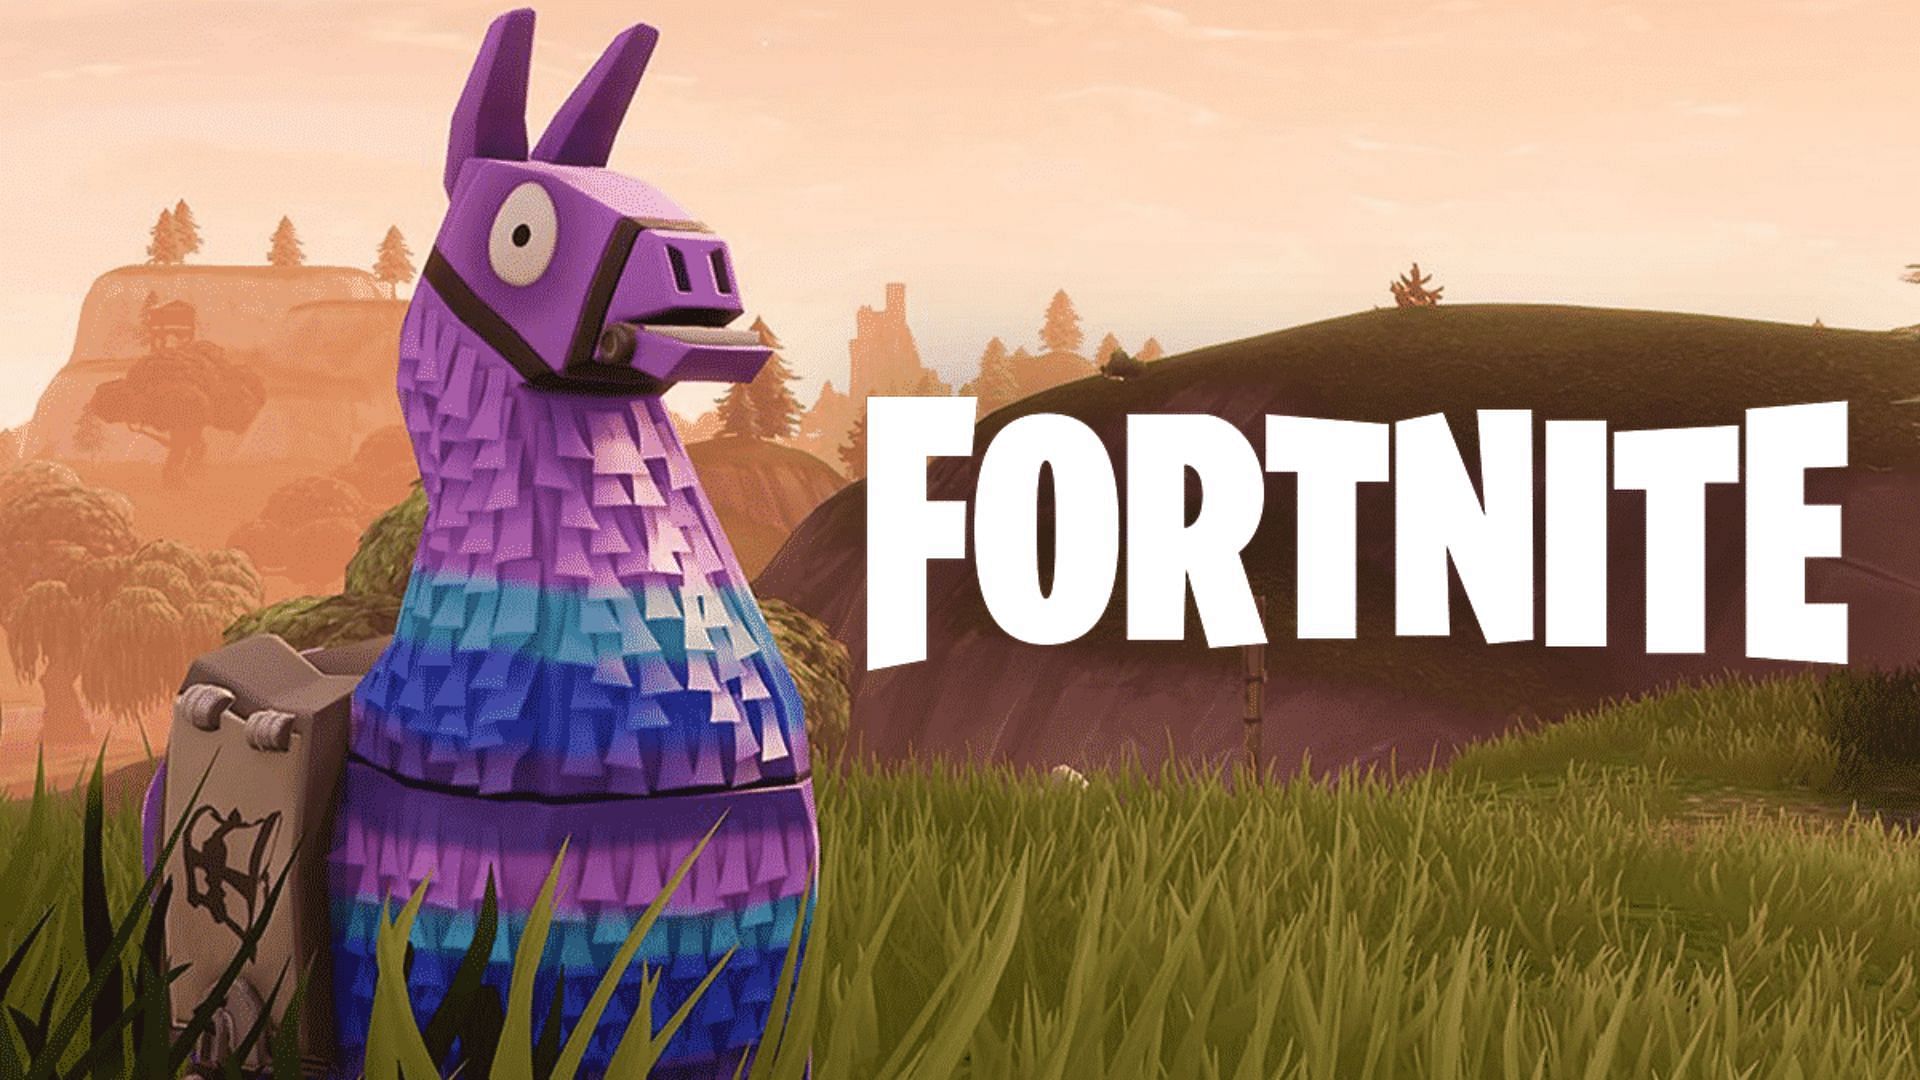 Llamas now spawn a rift for players if not eliminated (Image via CharlieIntel)